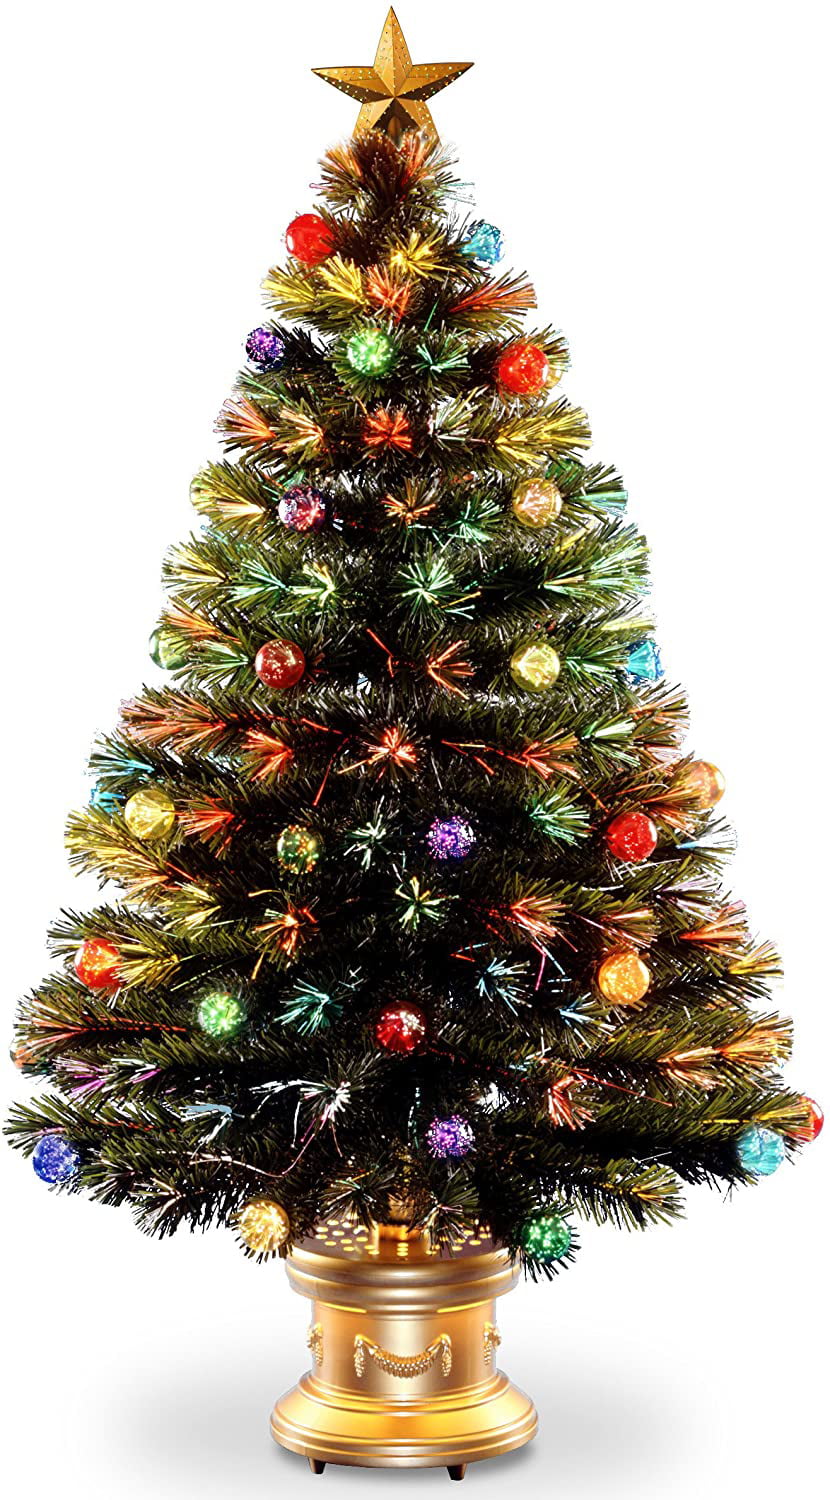 48 Inch Fiber Optic Ornament Fireworks Tree with Gold Top Star and